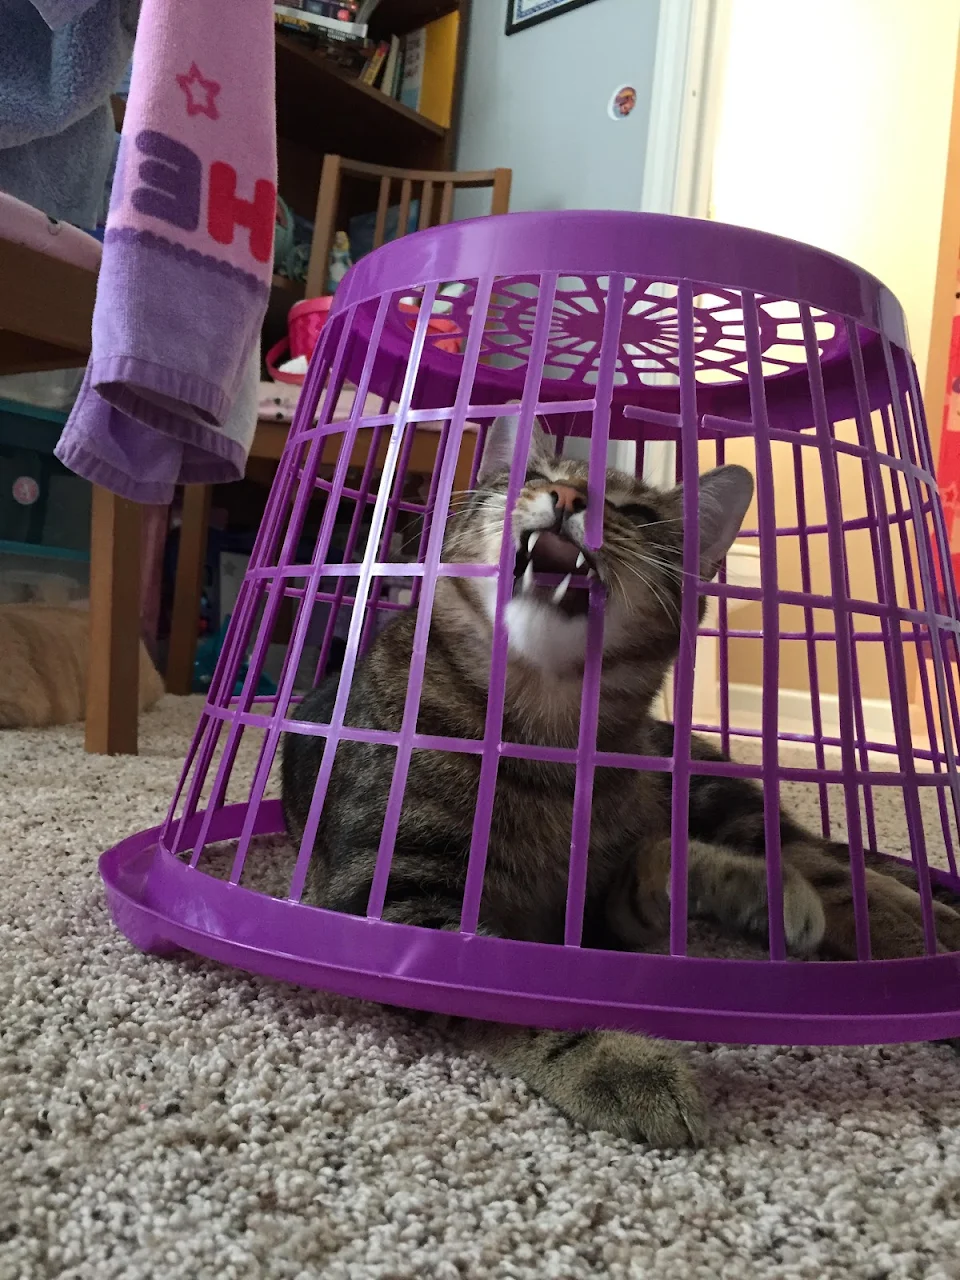 Rawr is lion in cage!